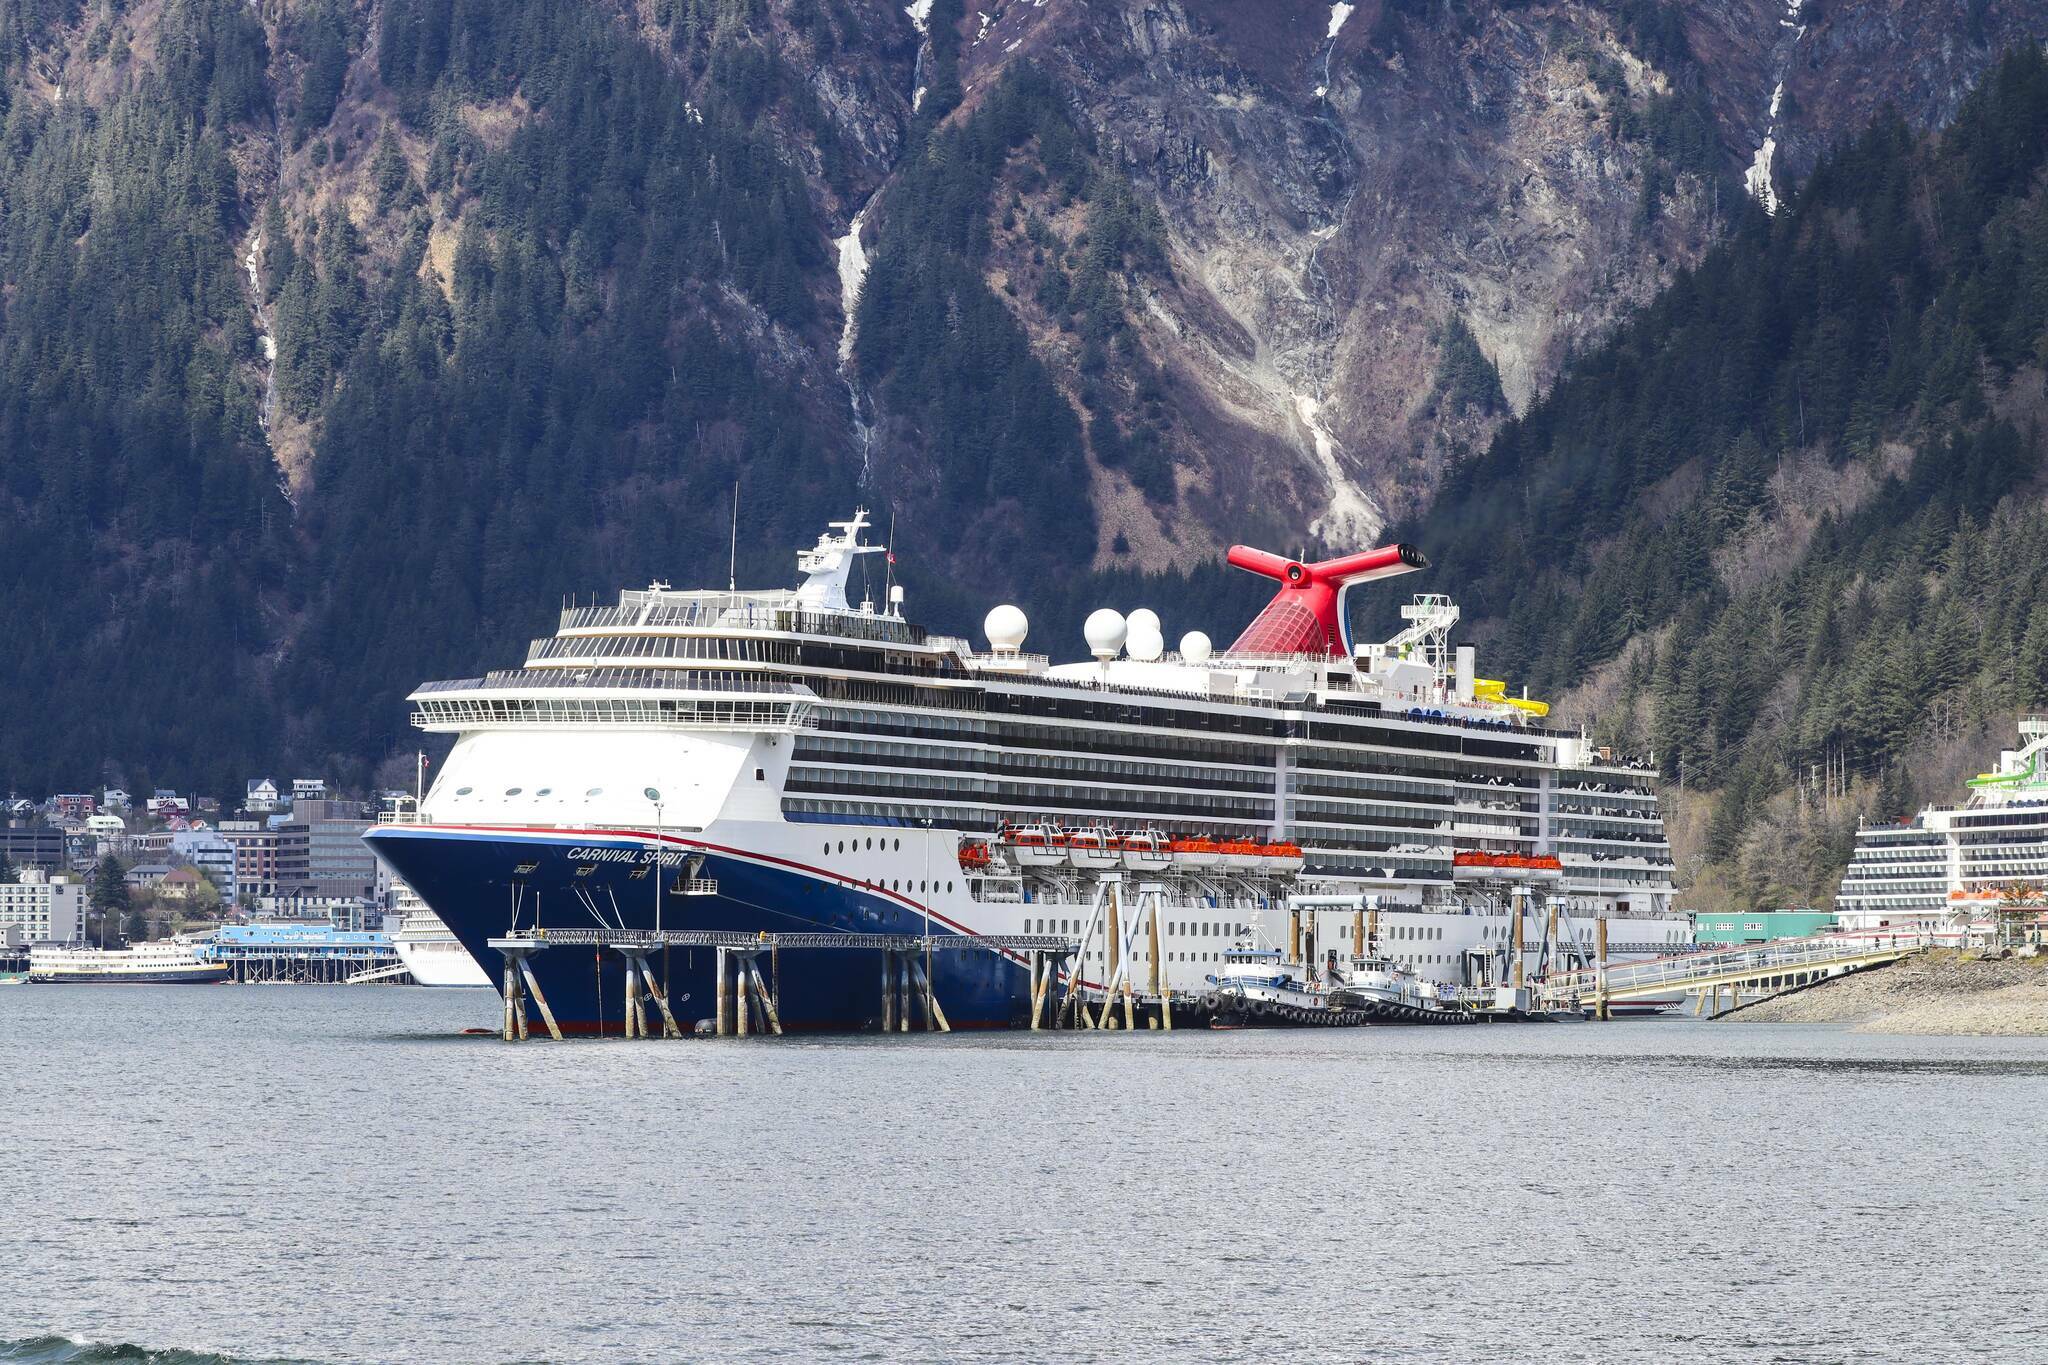 A Carnival cruise ship is berthed Juneau’s cruise ship docks during the summer of 2022. (Michael S. Lockett / Juneau Empire file photo)